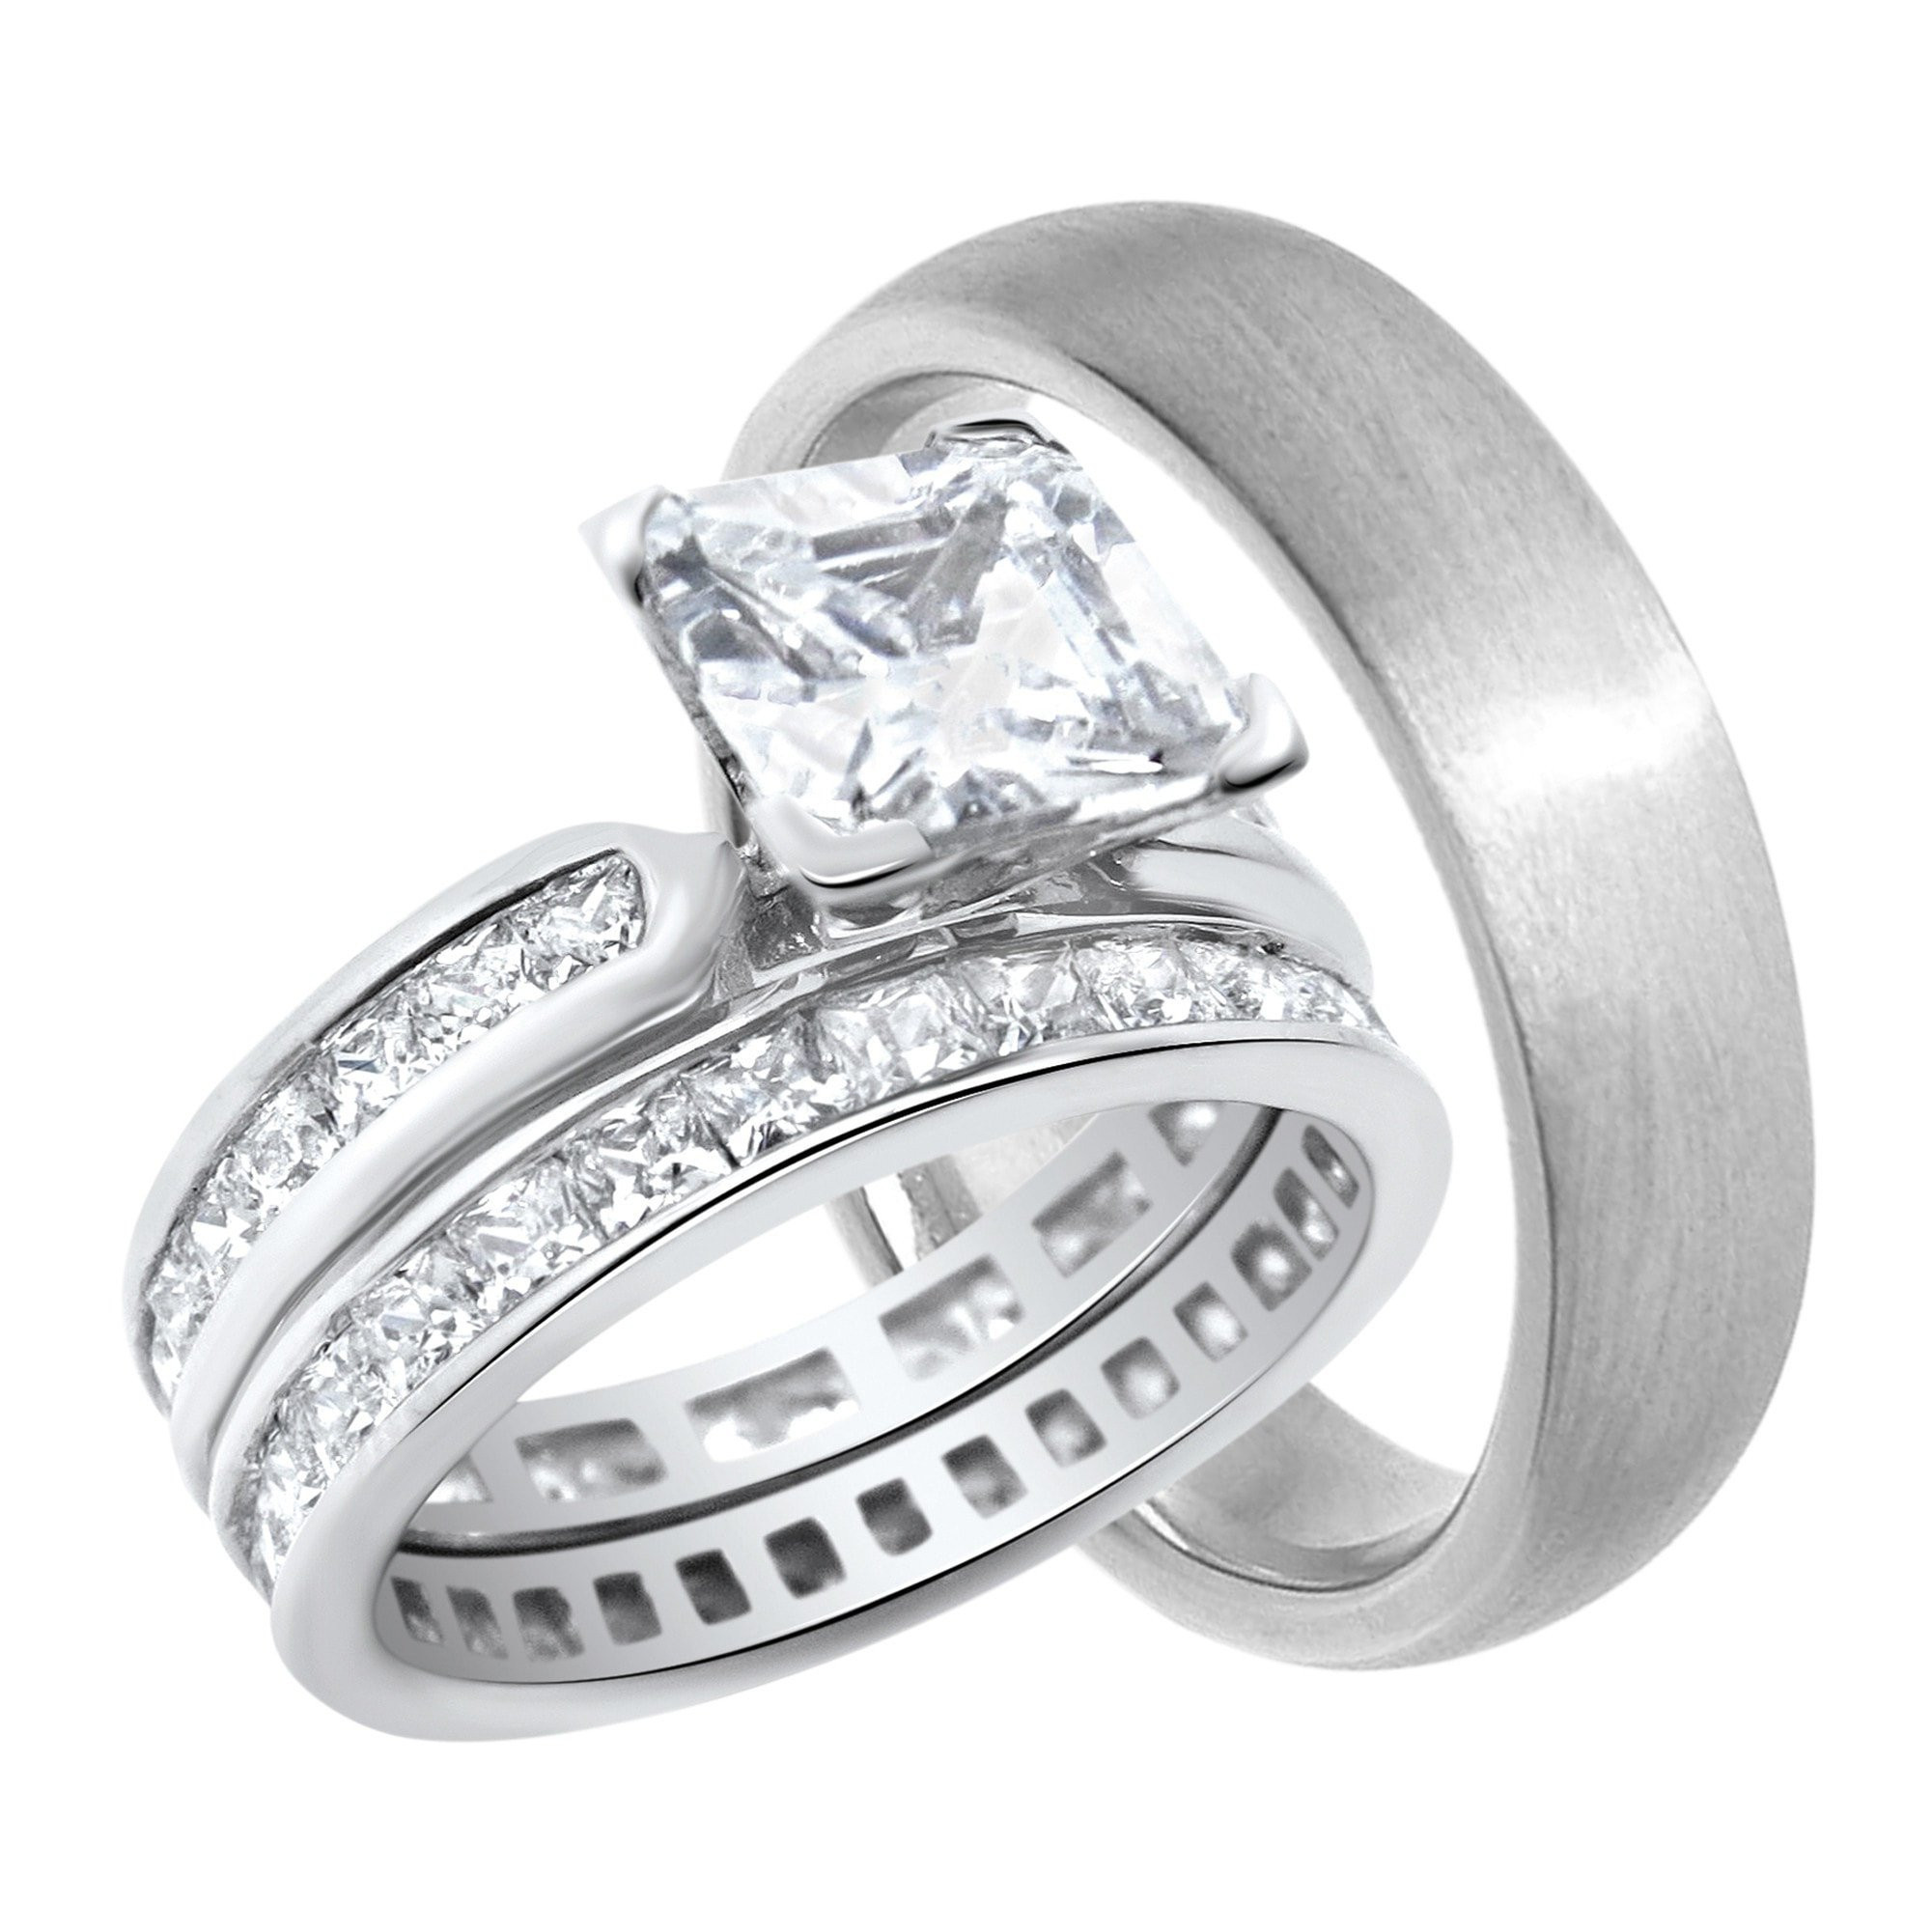 Walmart Wedding Rings Sets For Him And Her
 His Hers Wedding Rings Set Cheap Matching Rings for Him